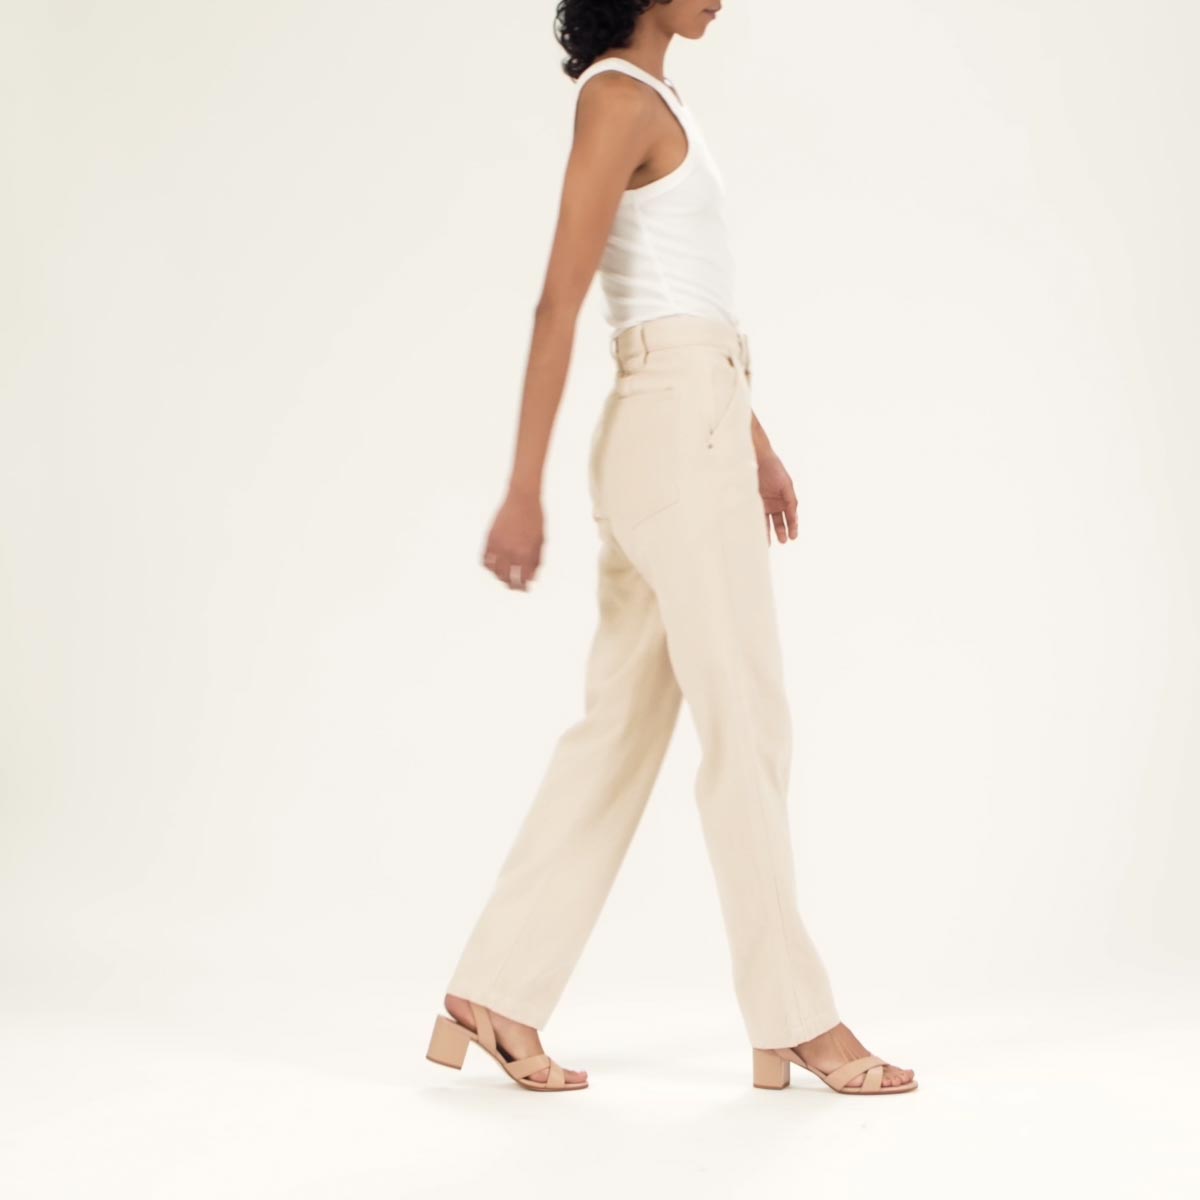 The City Sandal in Rose Nappa shown on model styled with a white tank top tucked into ivory straight leg denim.